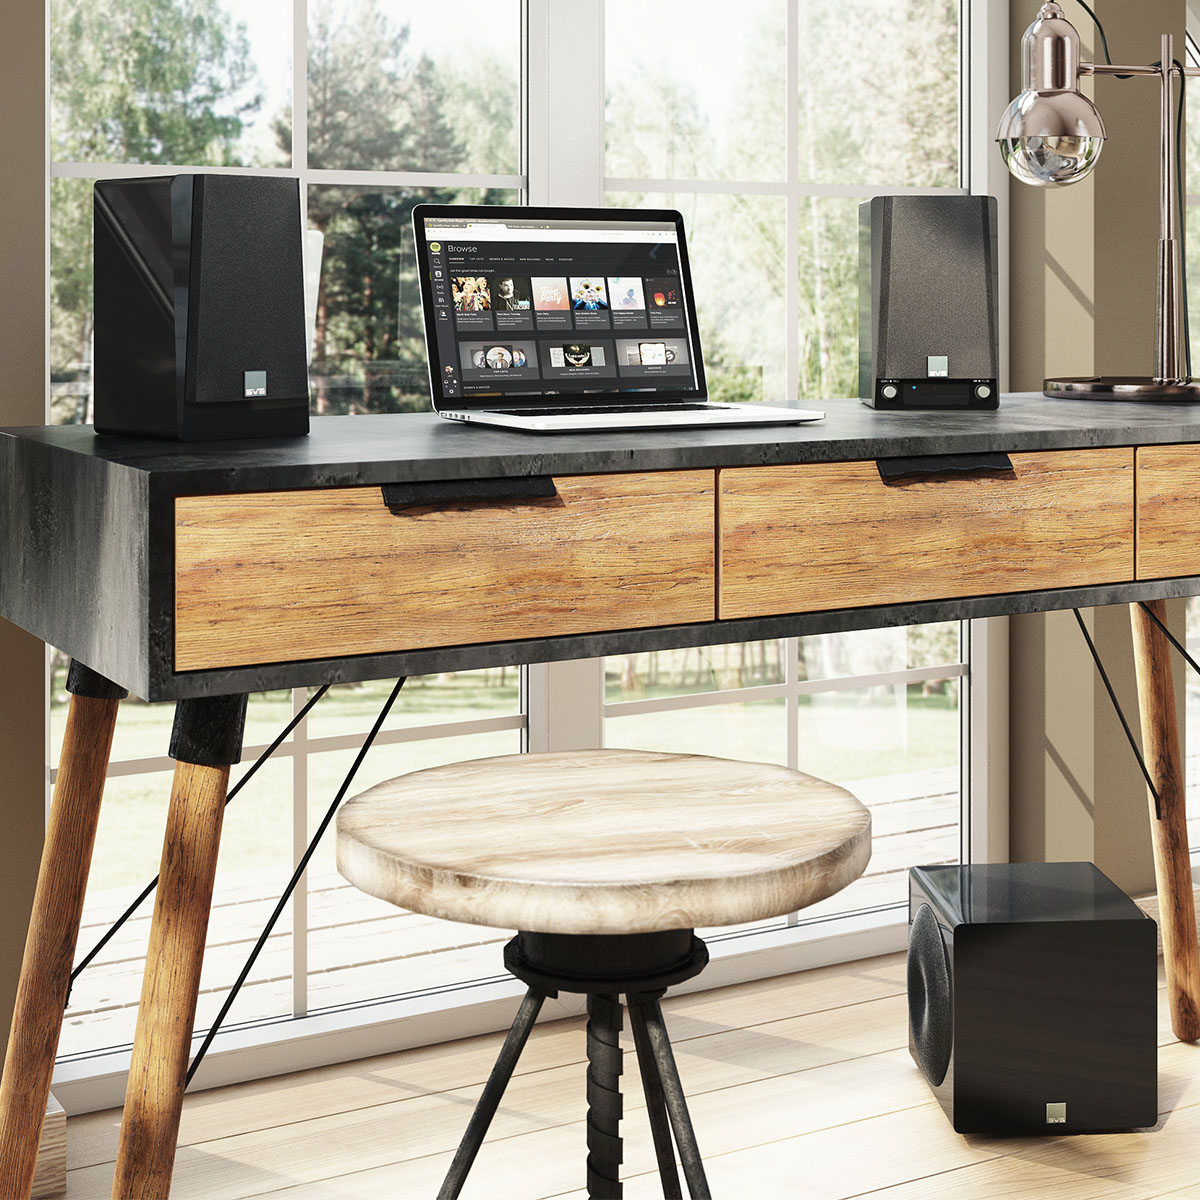 SVS 3000 Micro Subwoofer system with desk and laptop